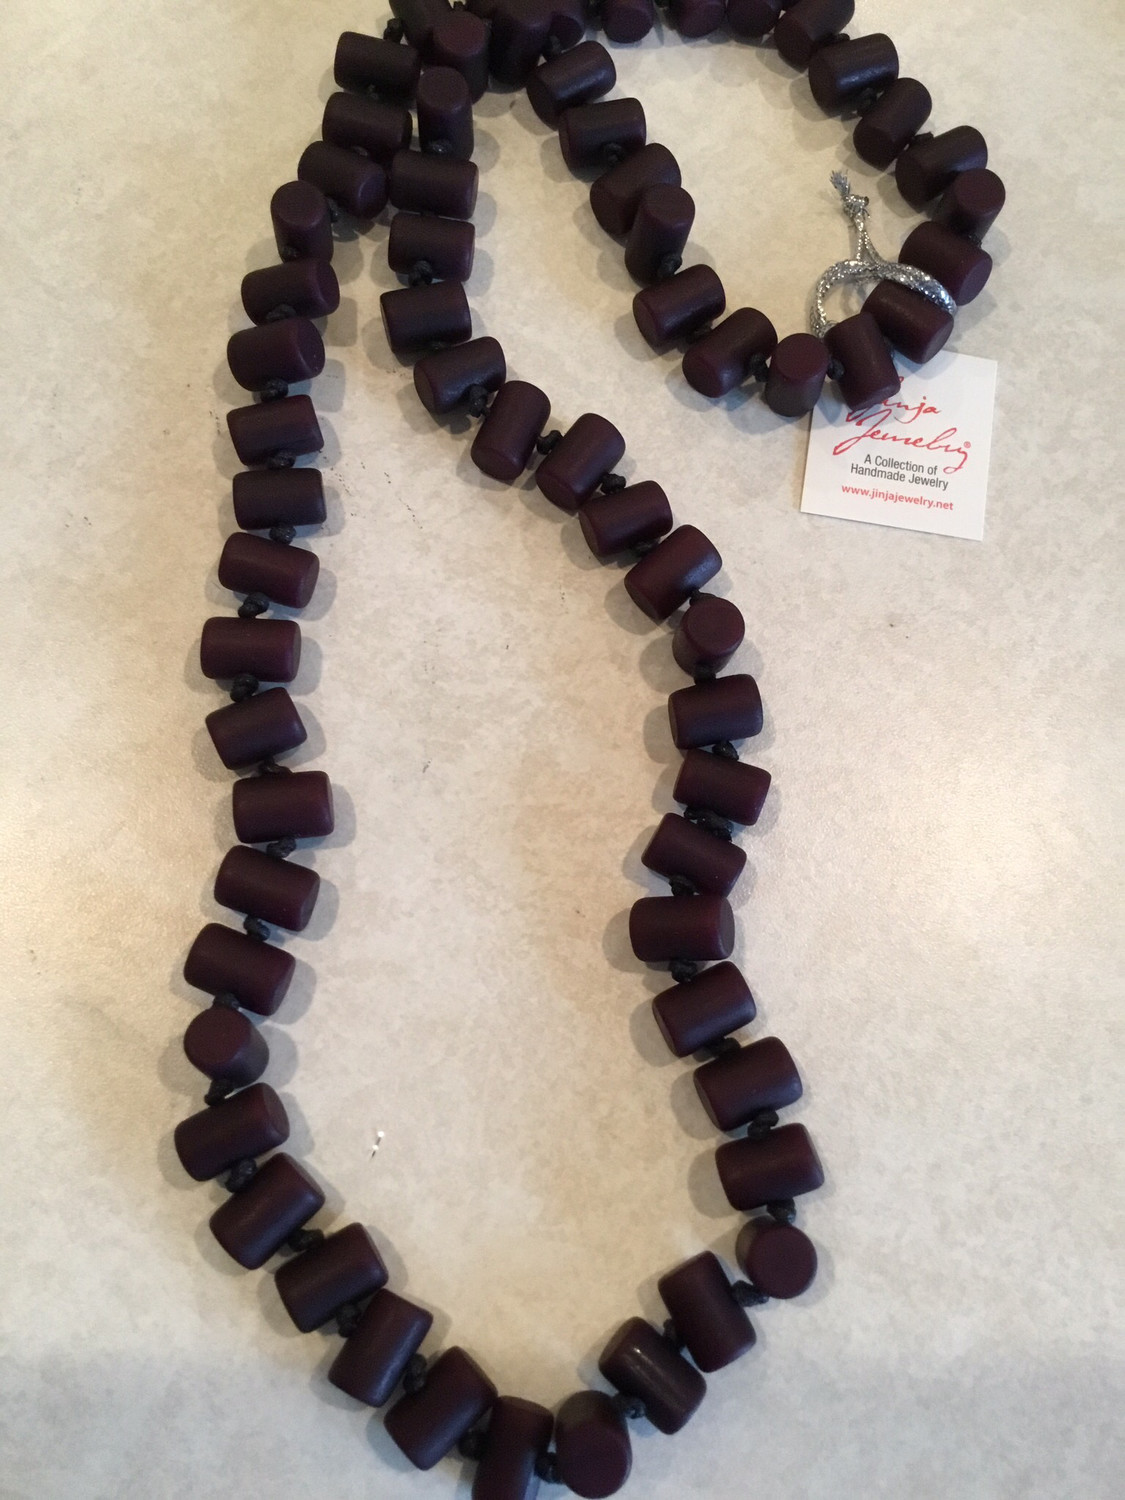 Bamboo Look Handmade Beads Knotted Necklace